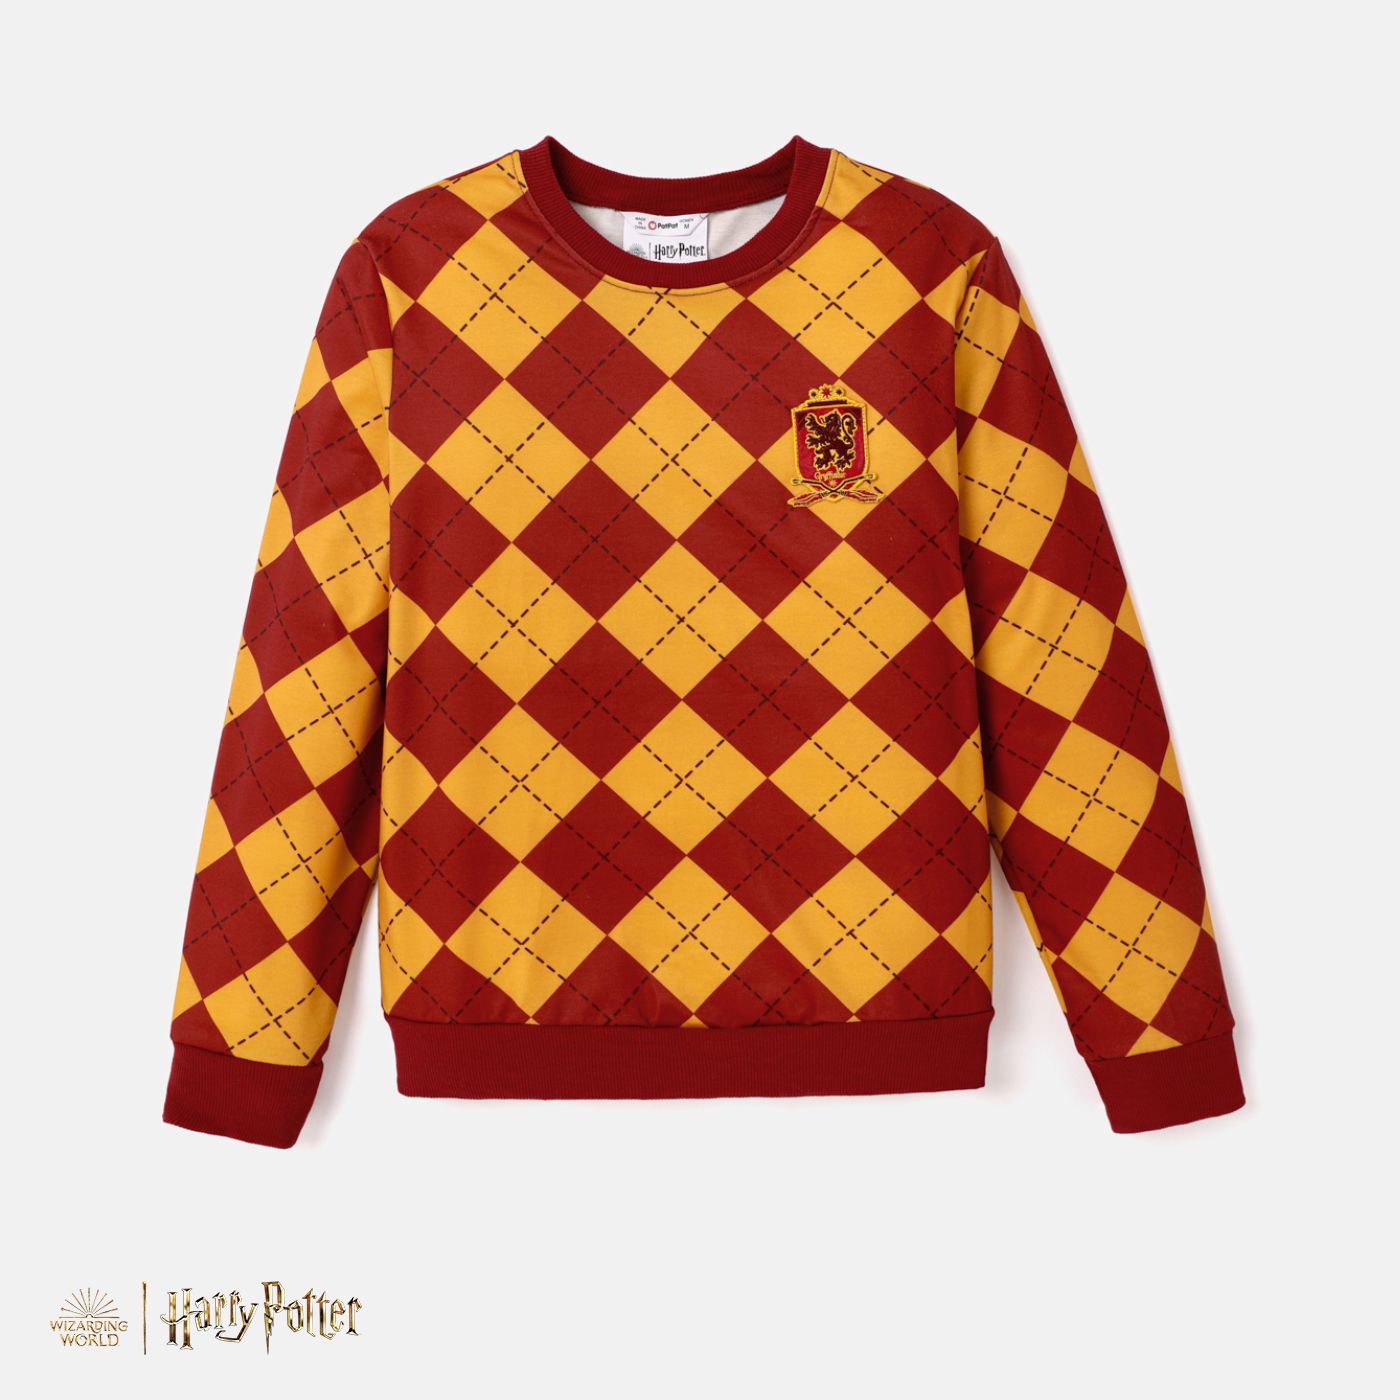 Harry Potter Family Matching Grid Letter Print Long-sleeve Tops